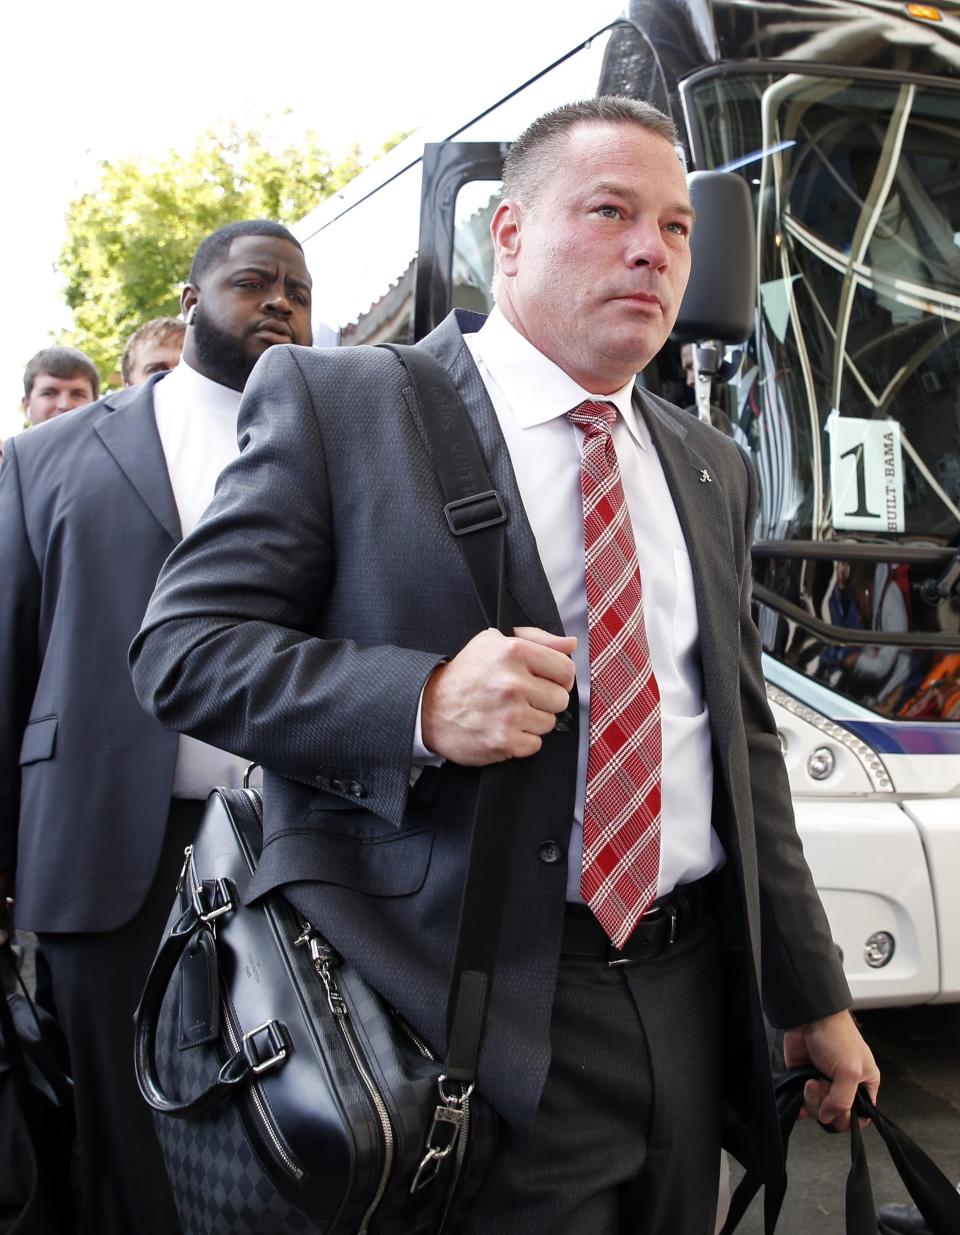 Former Tennessee head football coach Butch Jones arrives before an NCAA college football game between Alabama and Tennessee Saturday, Oct. 20, 2018, in Knoxville, Tenn. (AP Photo/Wade Payne)